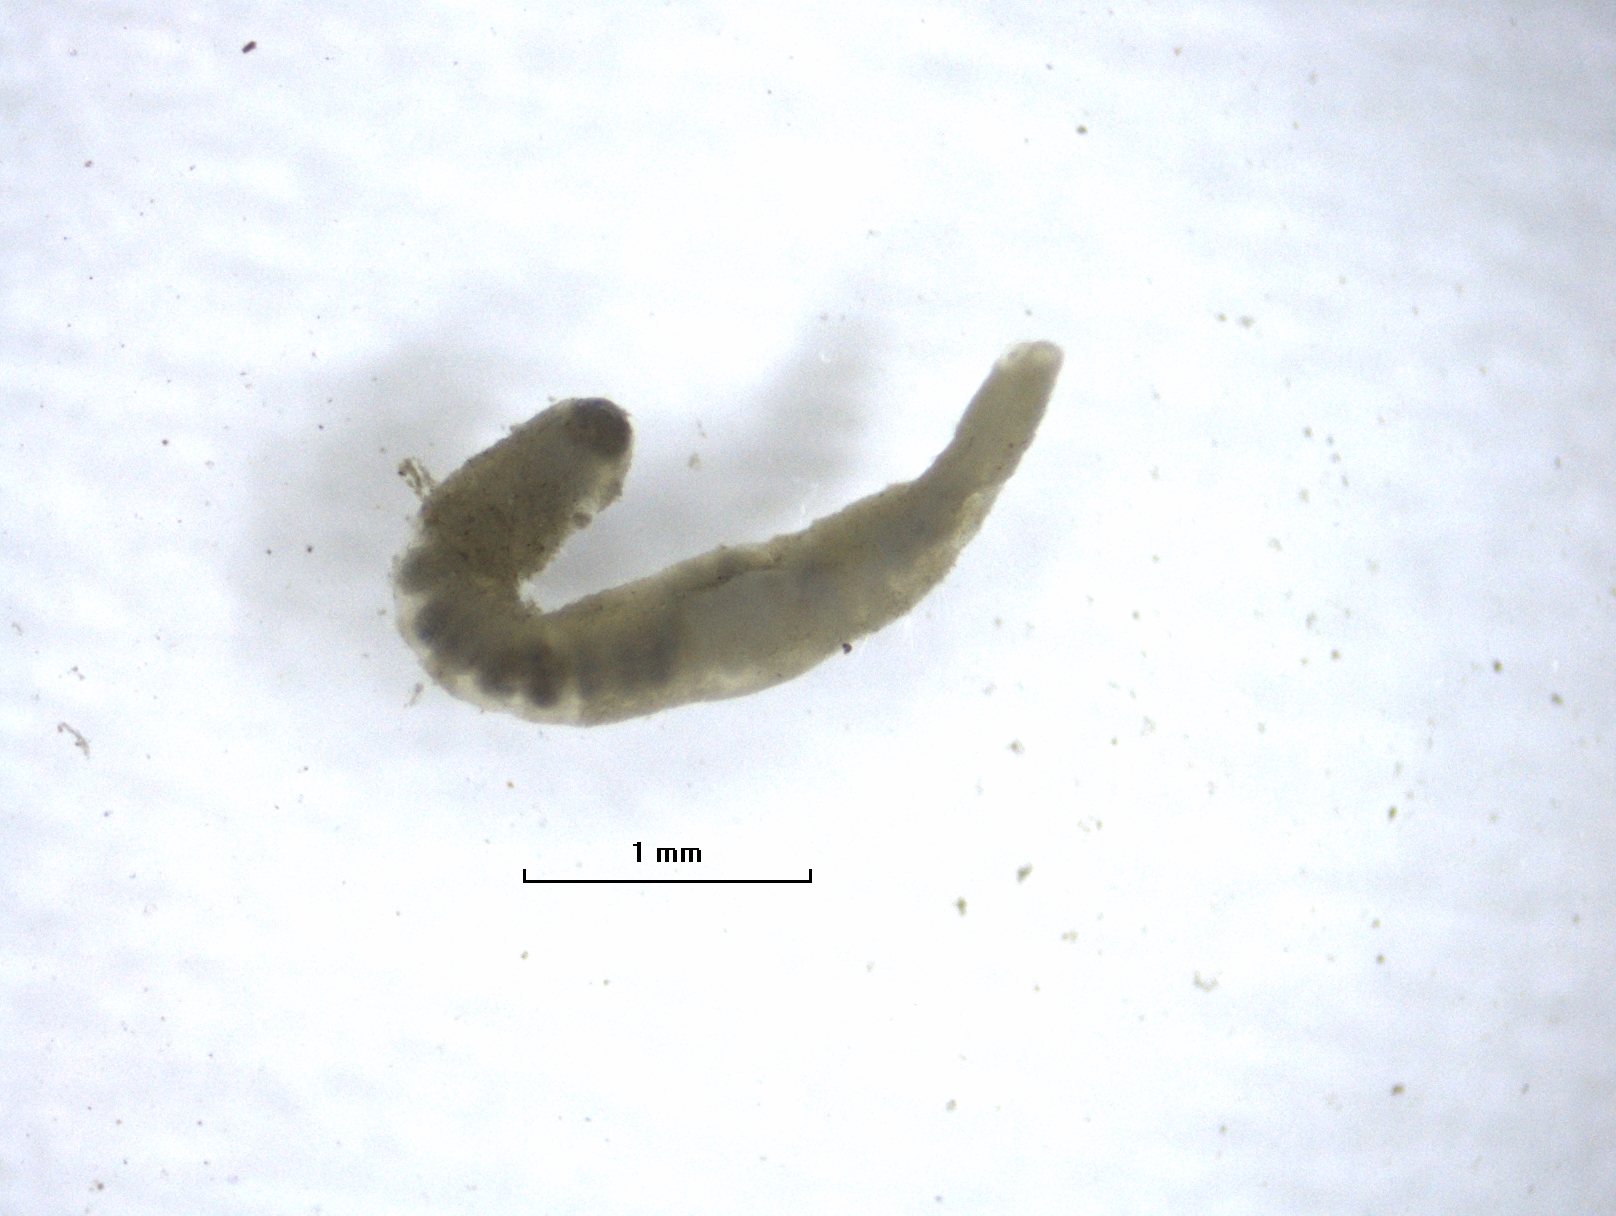 Photomicrograph of a worm with a thickened clitellum